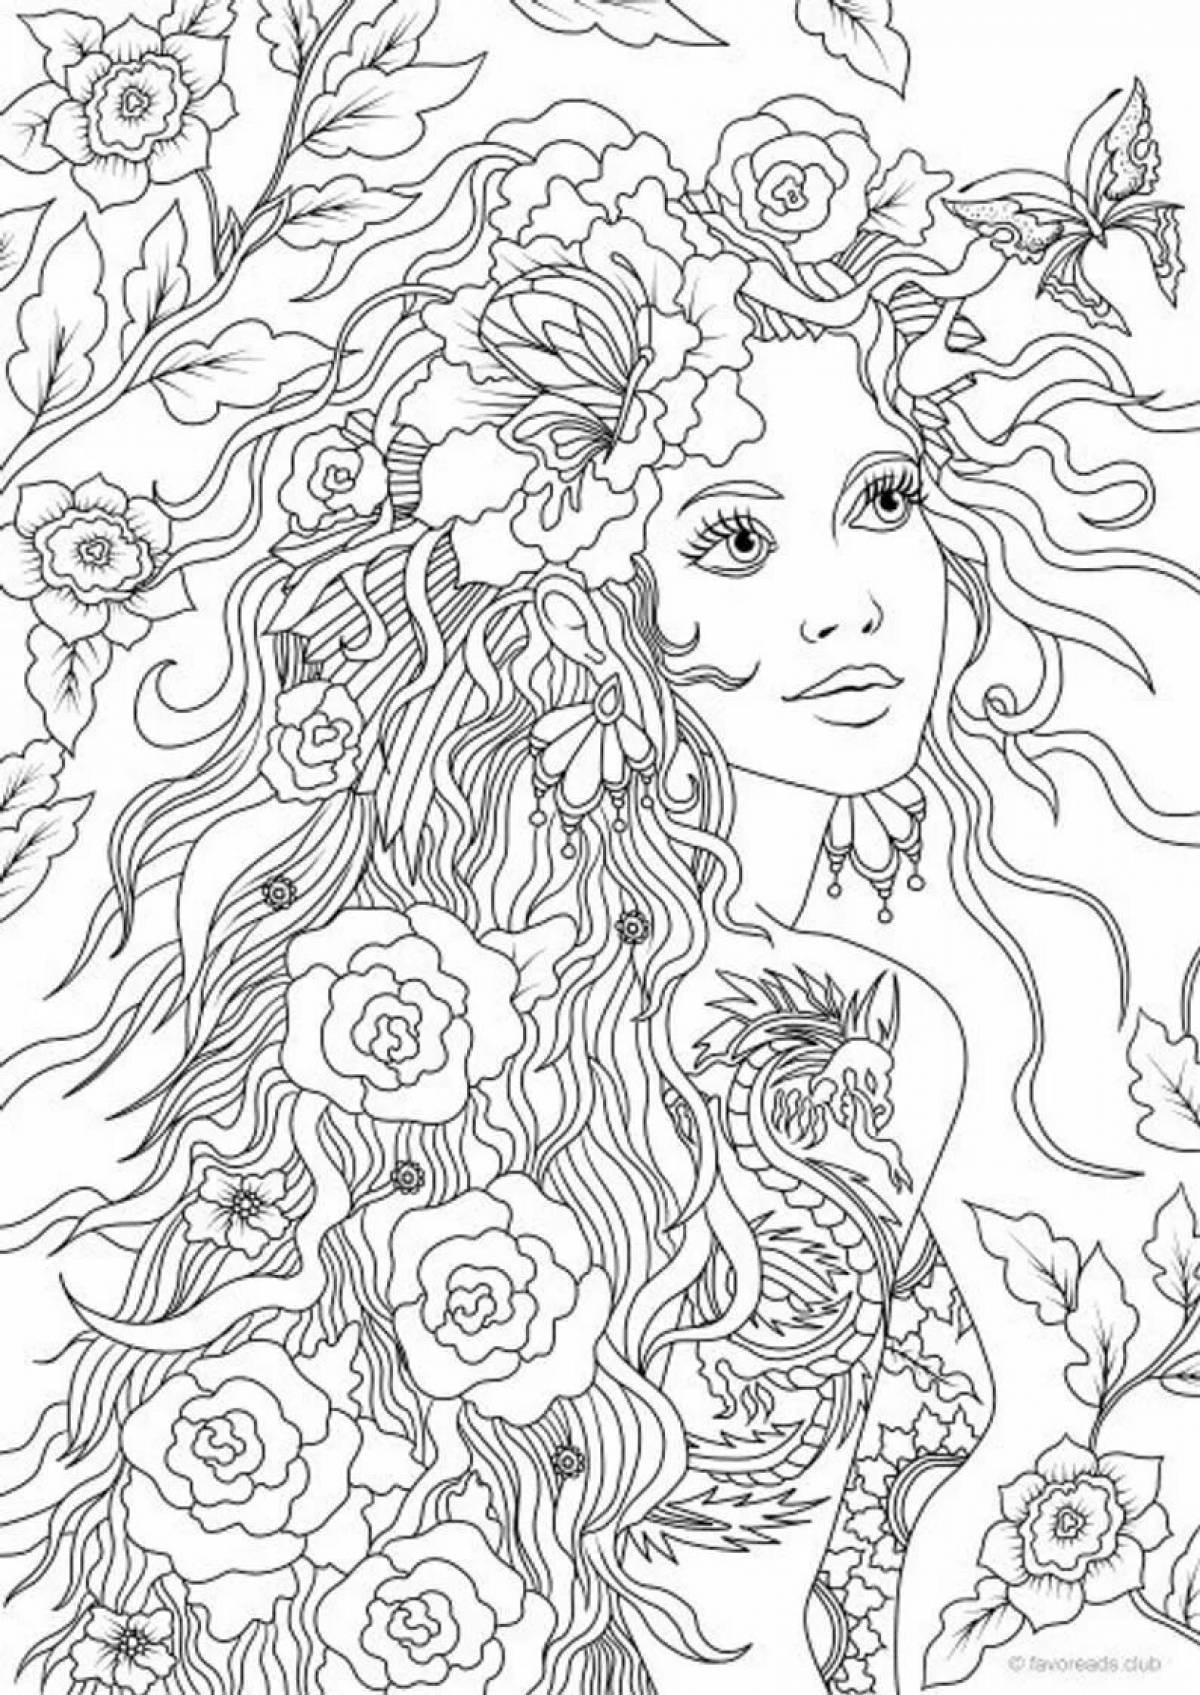 Creative coloring art page